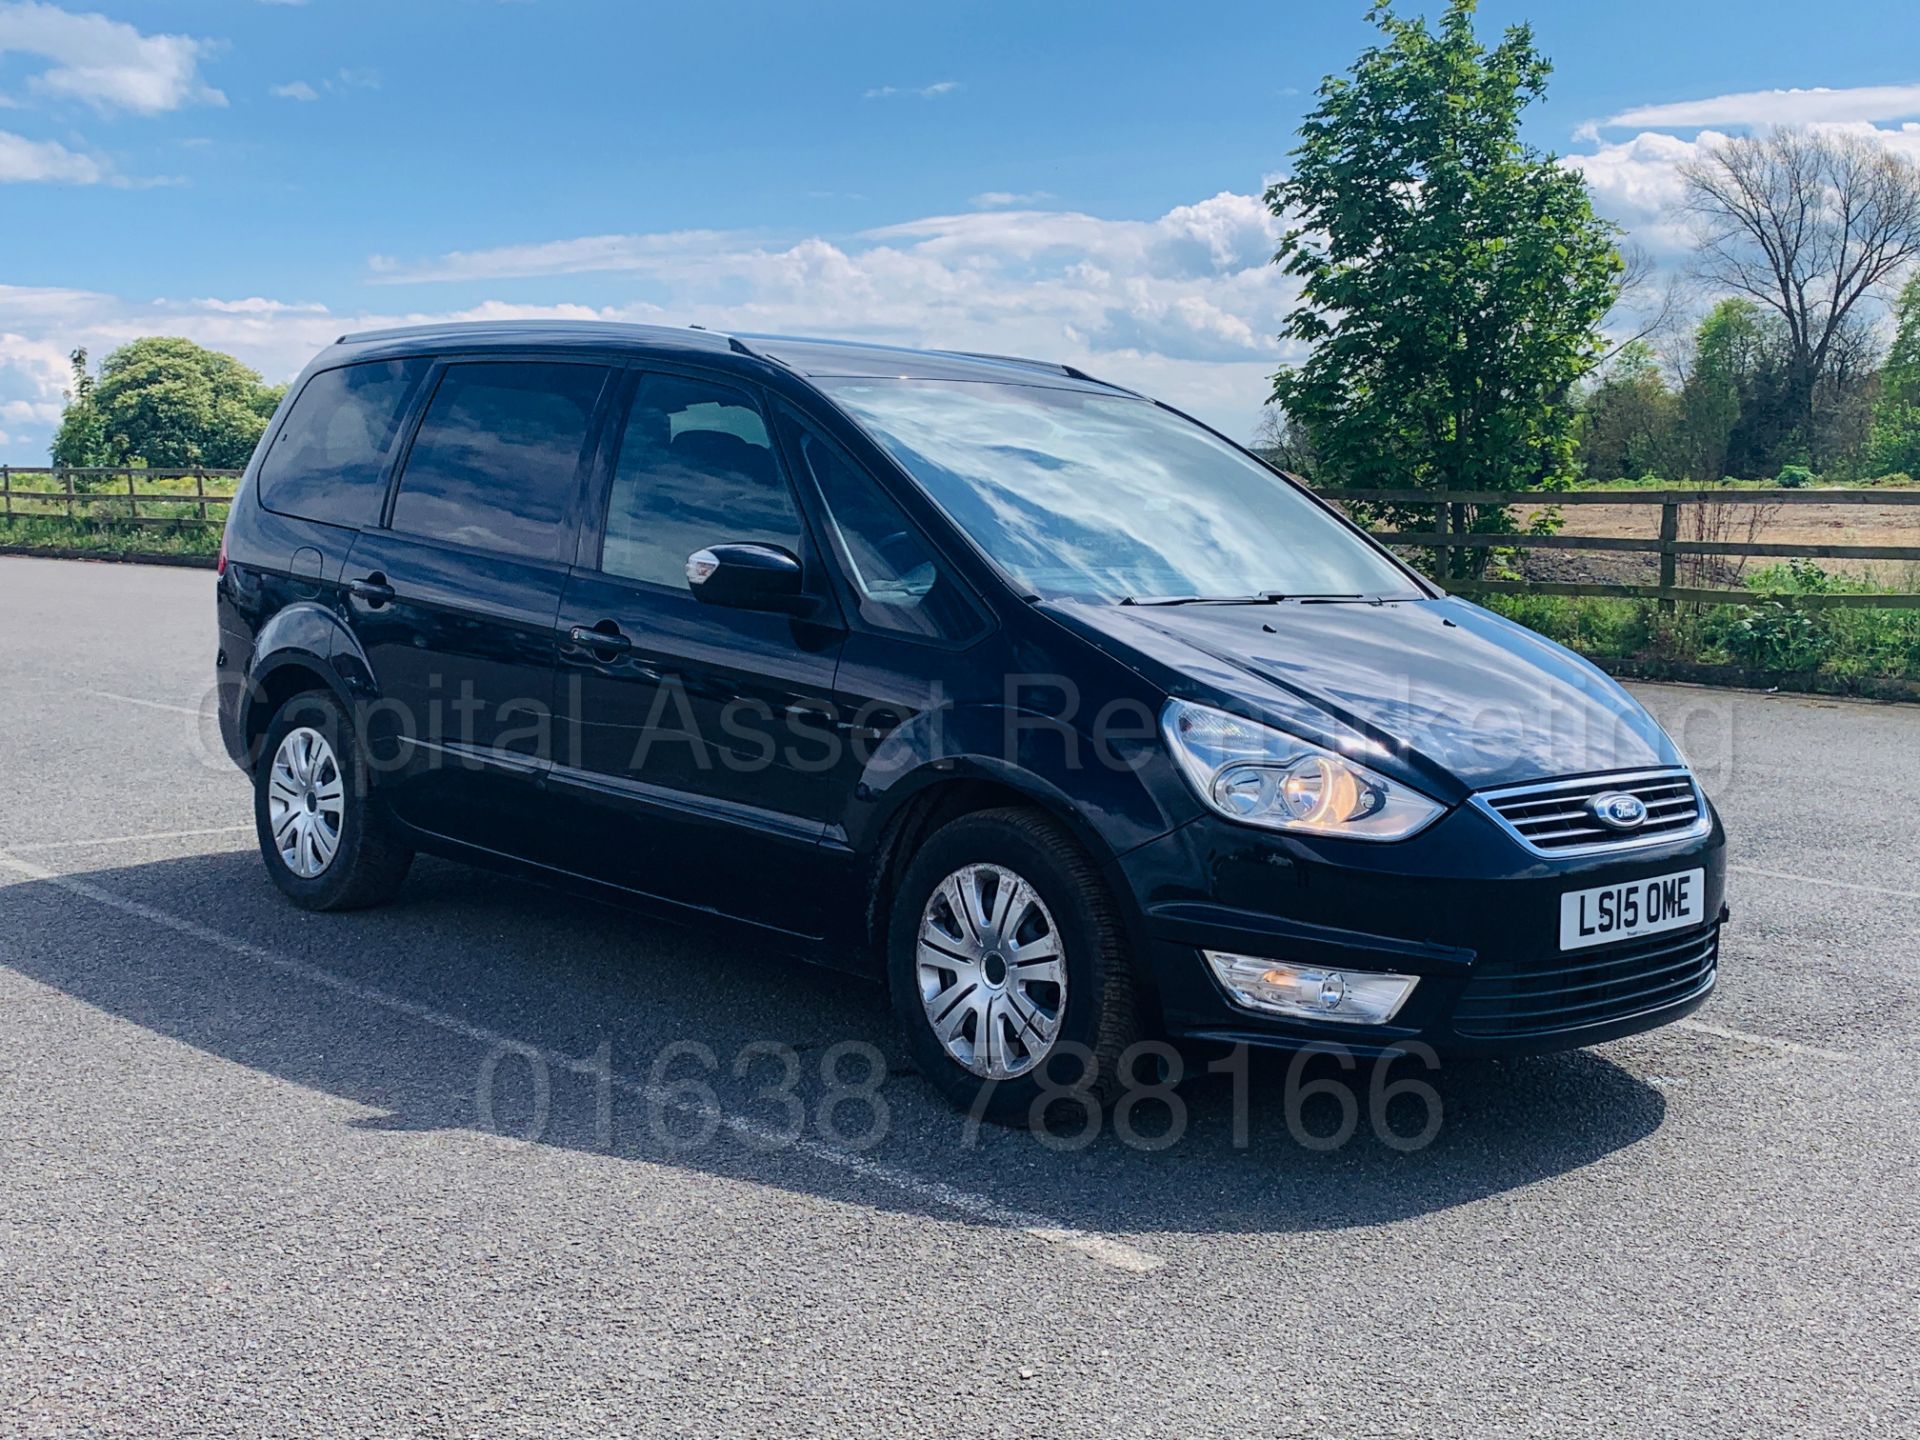 (On Sale) FORD GALAXY *ZETEC* 7 SEATER MPV (2015) '2.0 TDCI - 140 BHP - POWER SHIFT' (1 OWNER) - Image 10 of 37